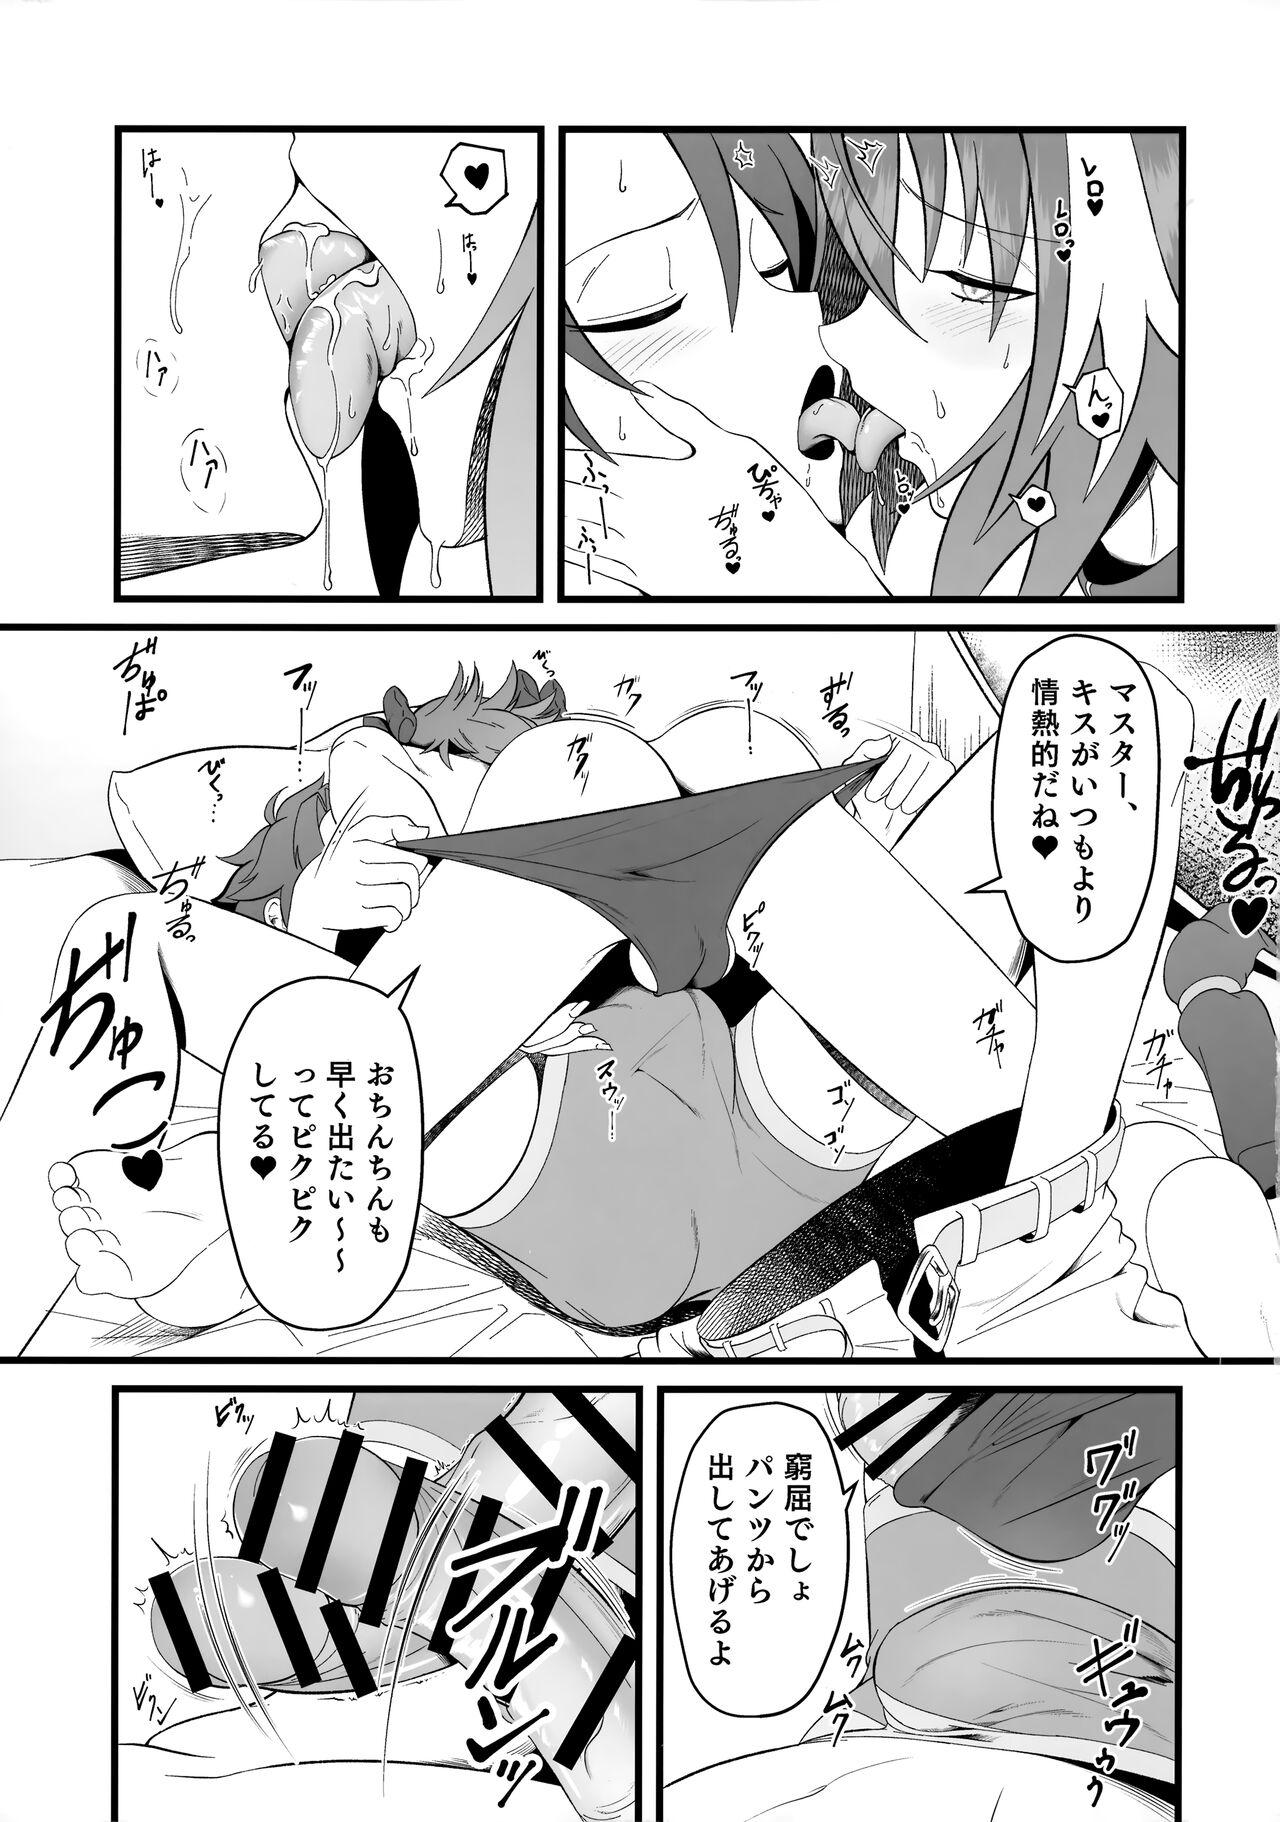 Tugging Kimi no Ichiban ni Naritakute - I wanted to be your number one. - Fate grand order Closeup - Page 10